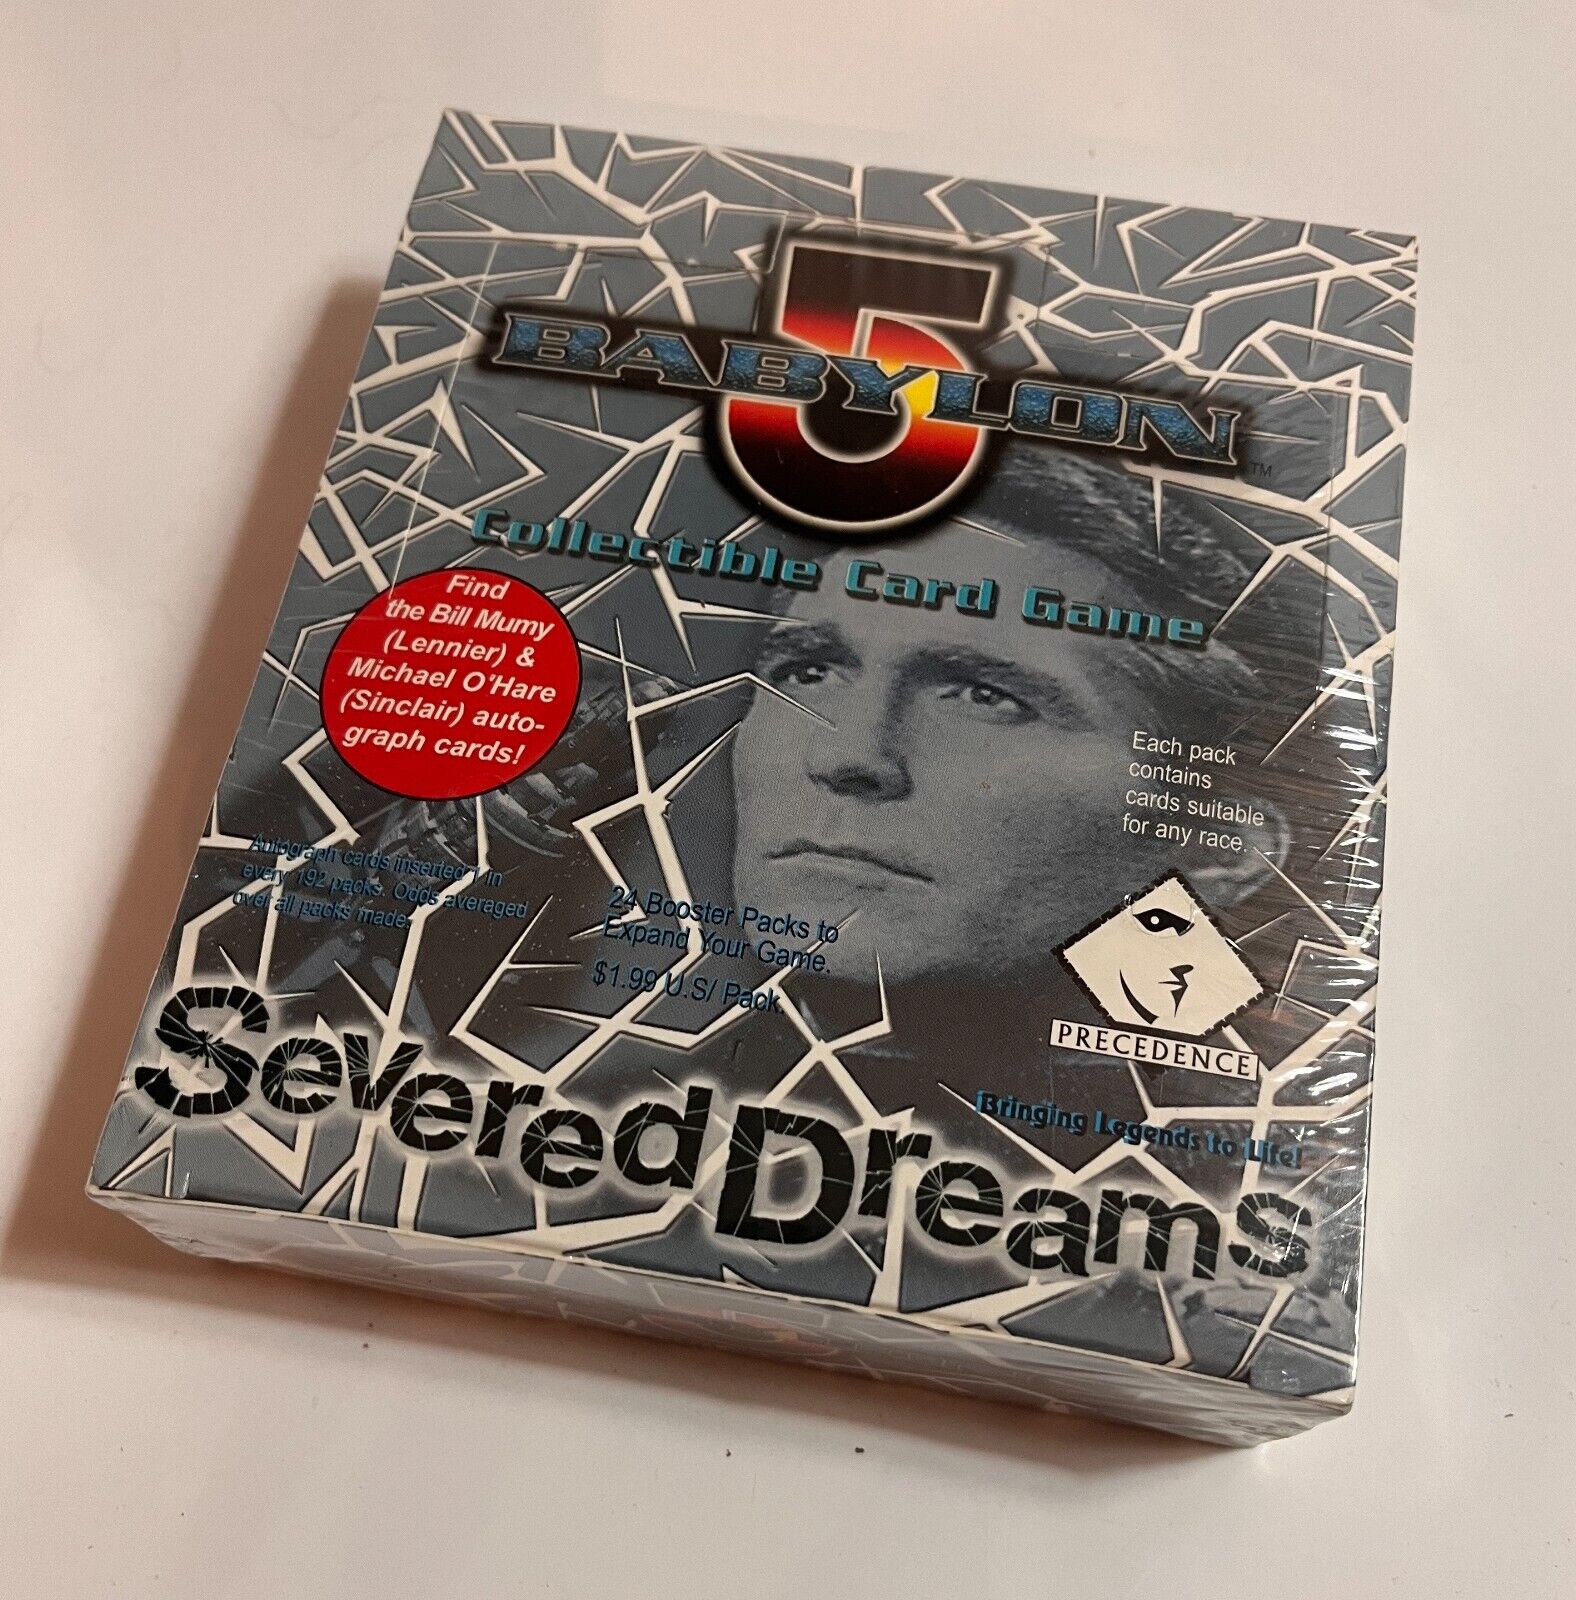 Babylon 5 CCG: Severed Dreams expansion, factory sealed display booster box